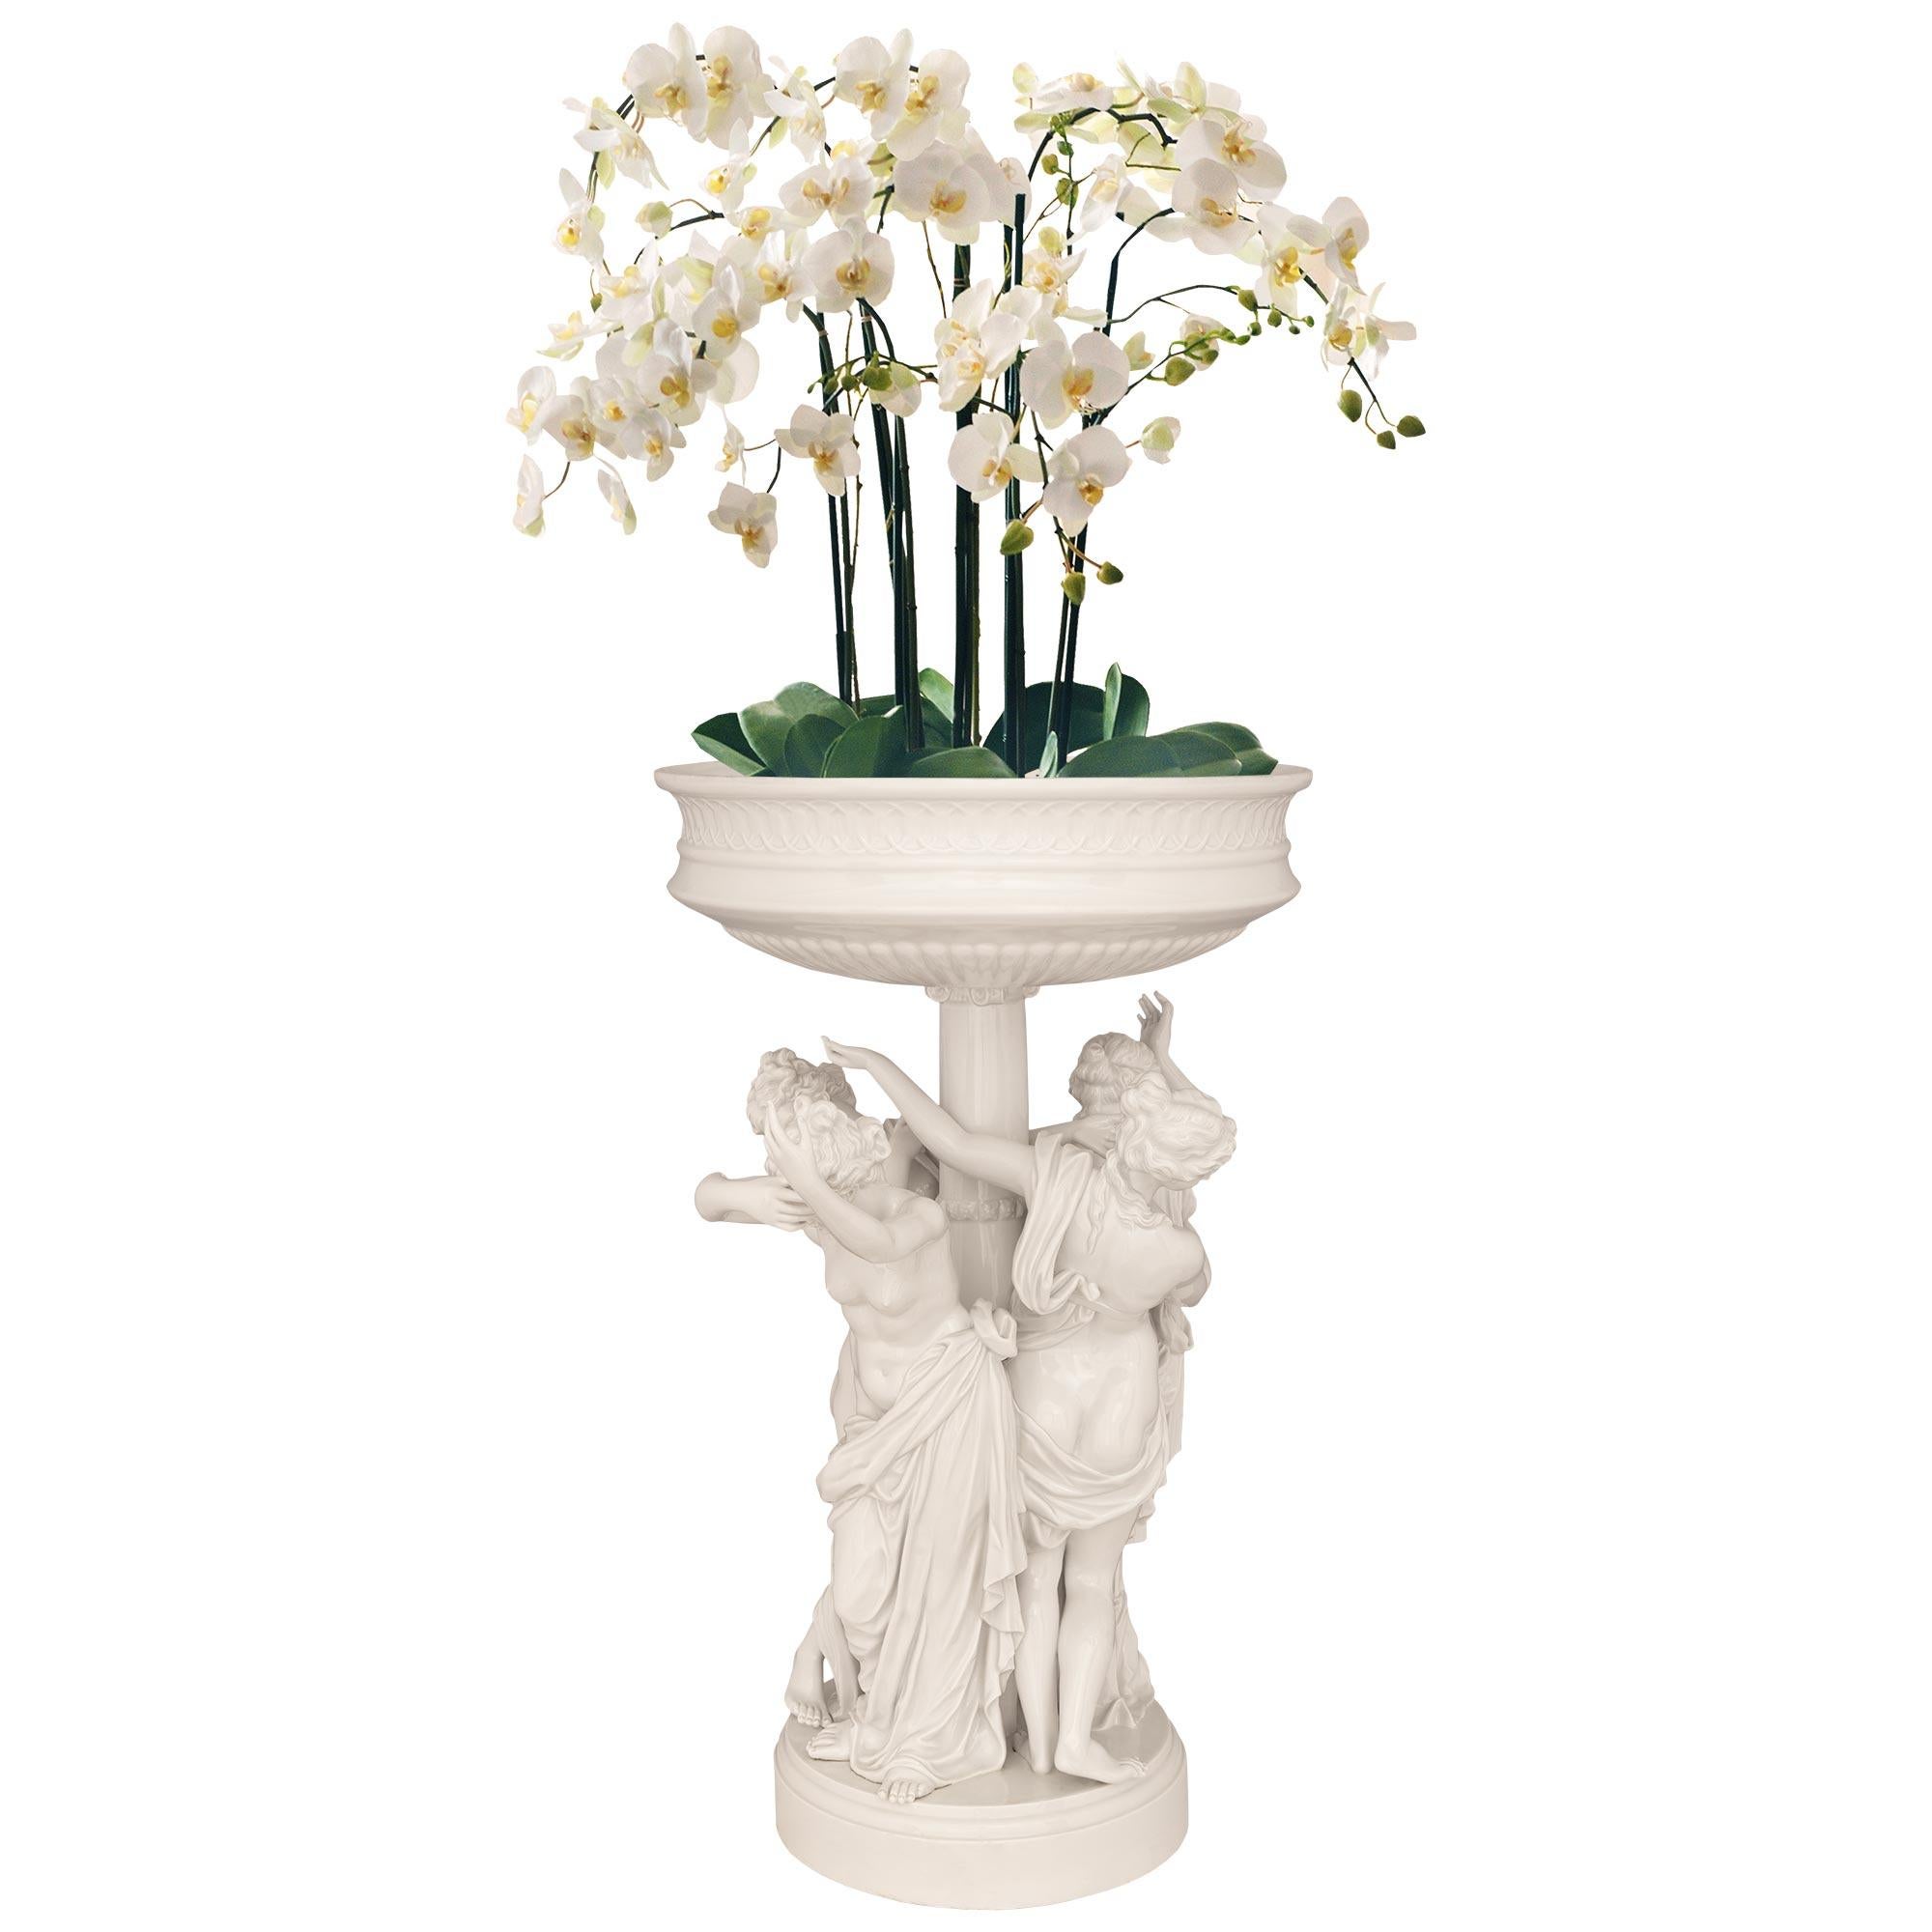 A stunning and exquisitely detailed pair of German 19th century Louis XVI st. Dresden porcelain planters, signed Dresden. Each circular planter is raised by a mottled edge pedestal and supported by a central fut column with a scrolled capital and